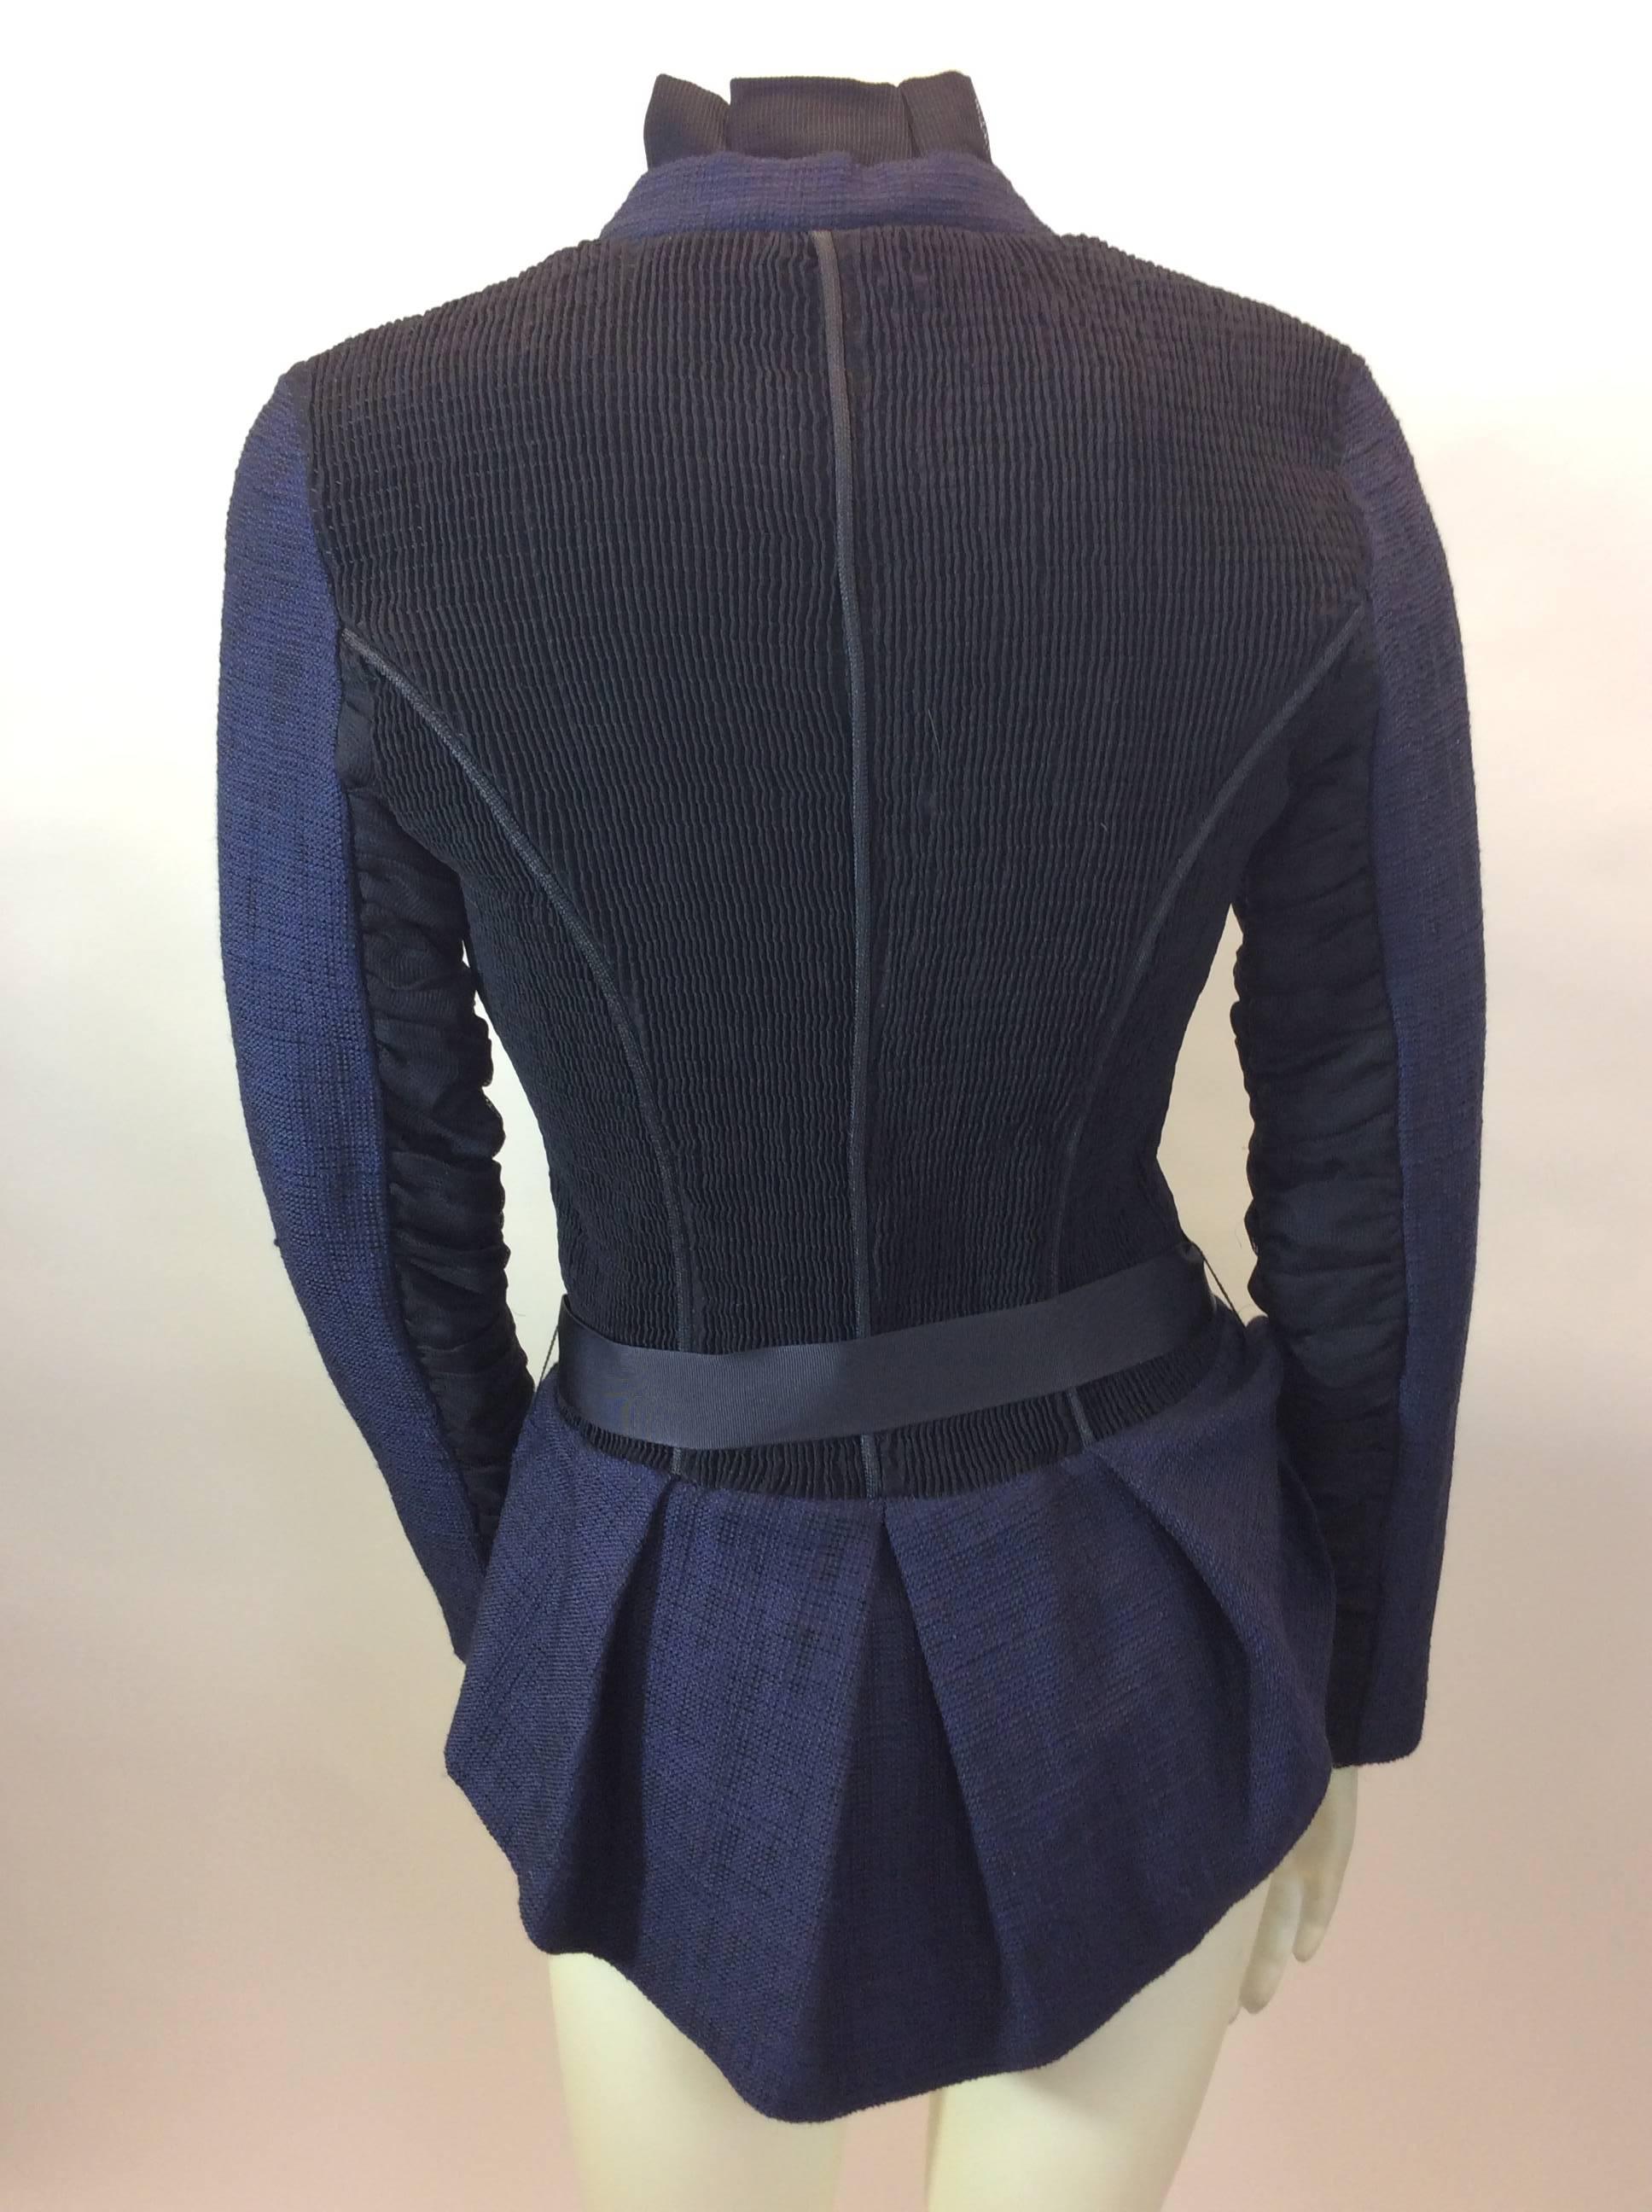 Fendi Navy Blue and Black Jacket In Excellent Condition For Sale In Narberth, PA